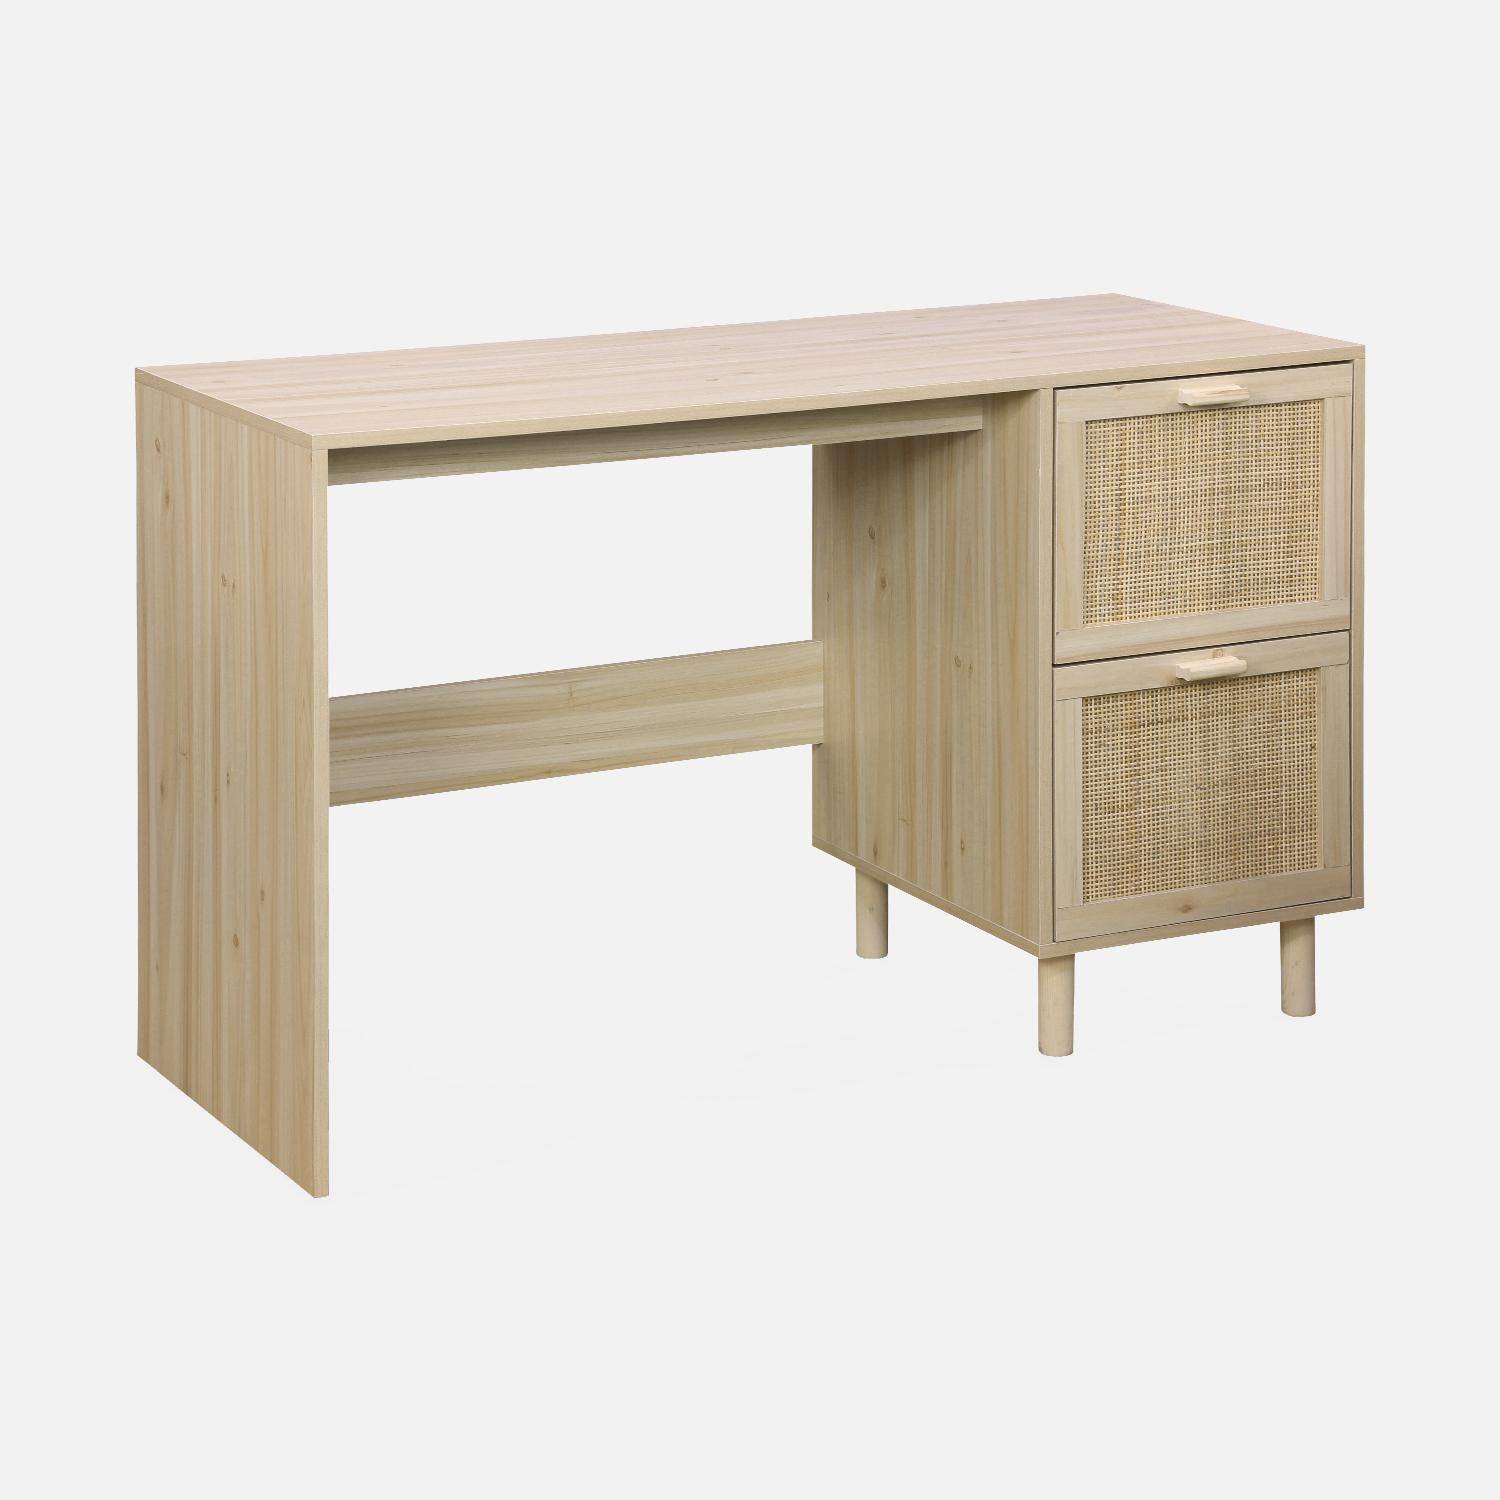 Woven rattan desk with 2 drawers, 120x48x75cm - Camargue - Natural Photo3